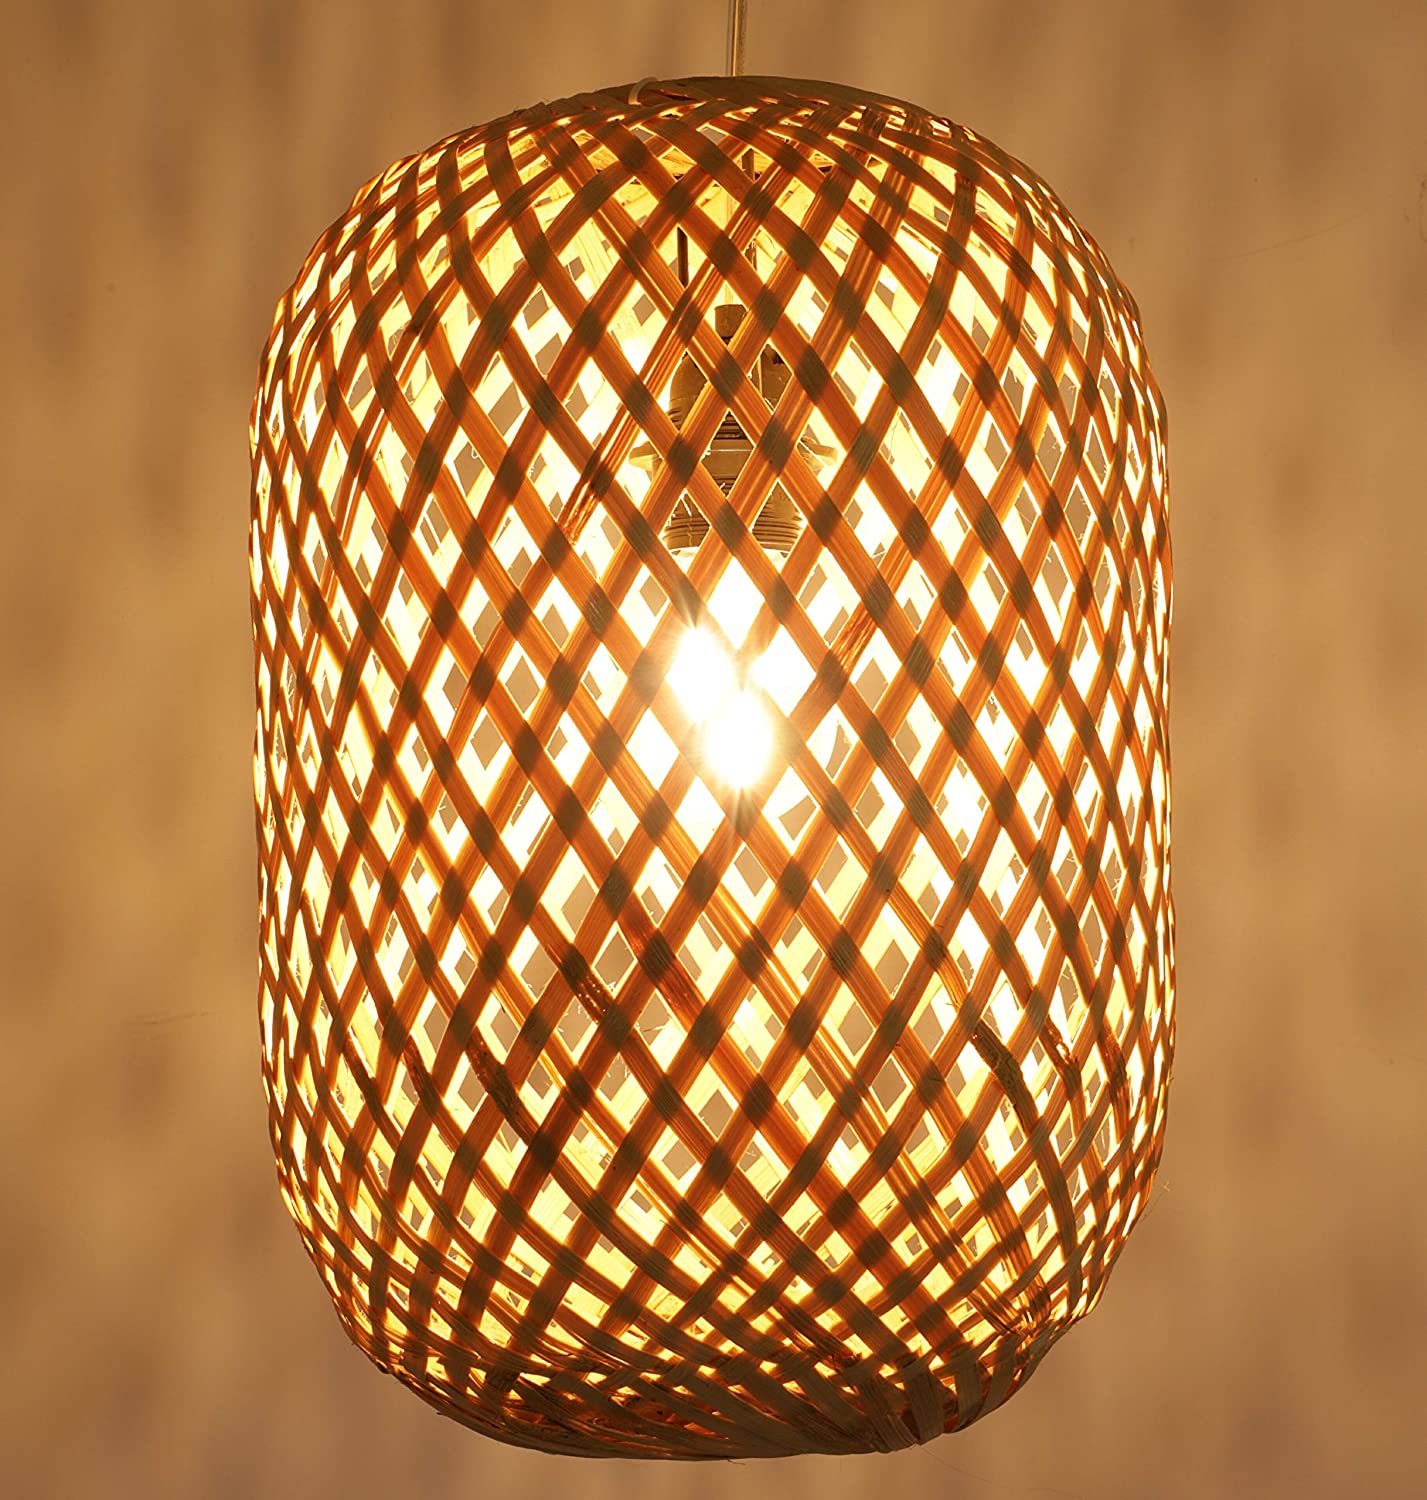 Ceiling Lamp / Ceiling Light, Handmade In Bali From Natural Material, Ratta